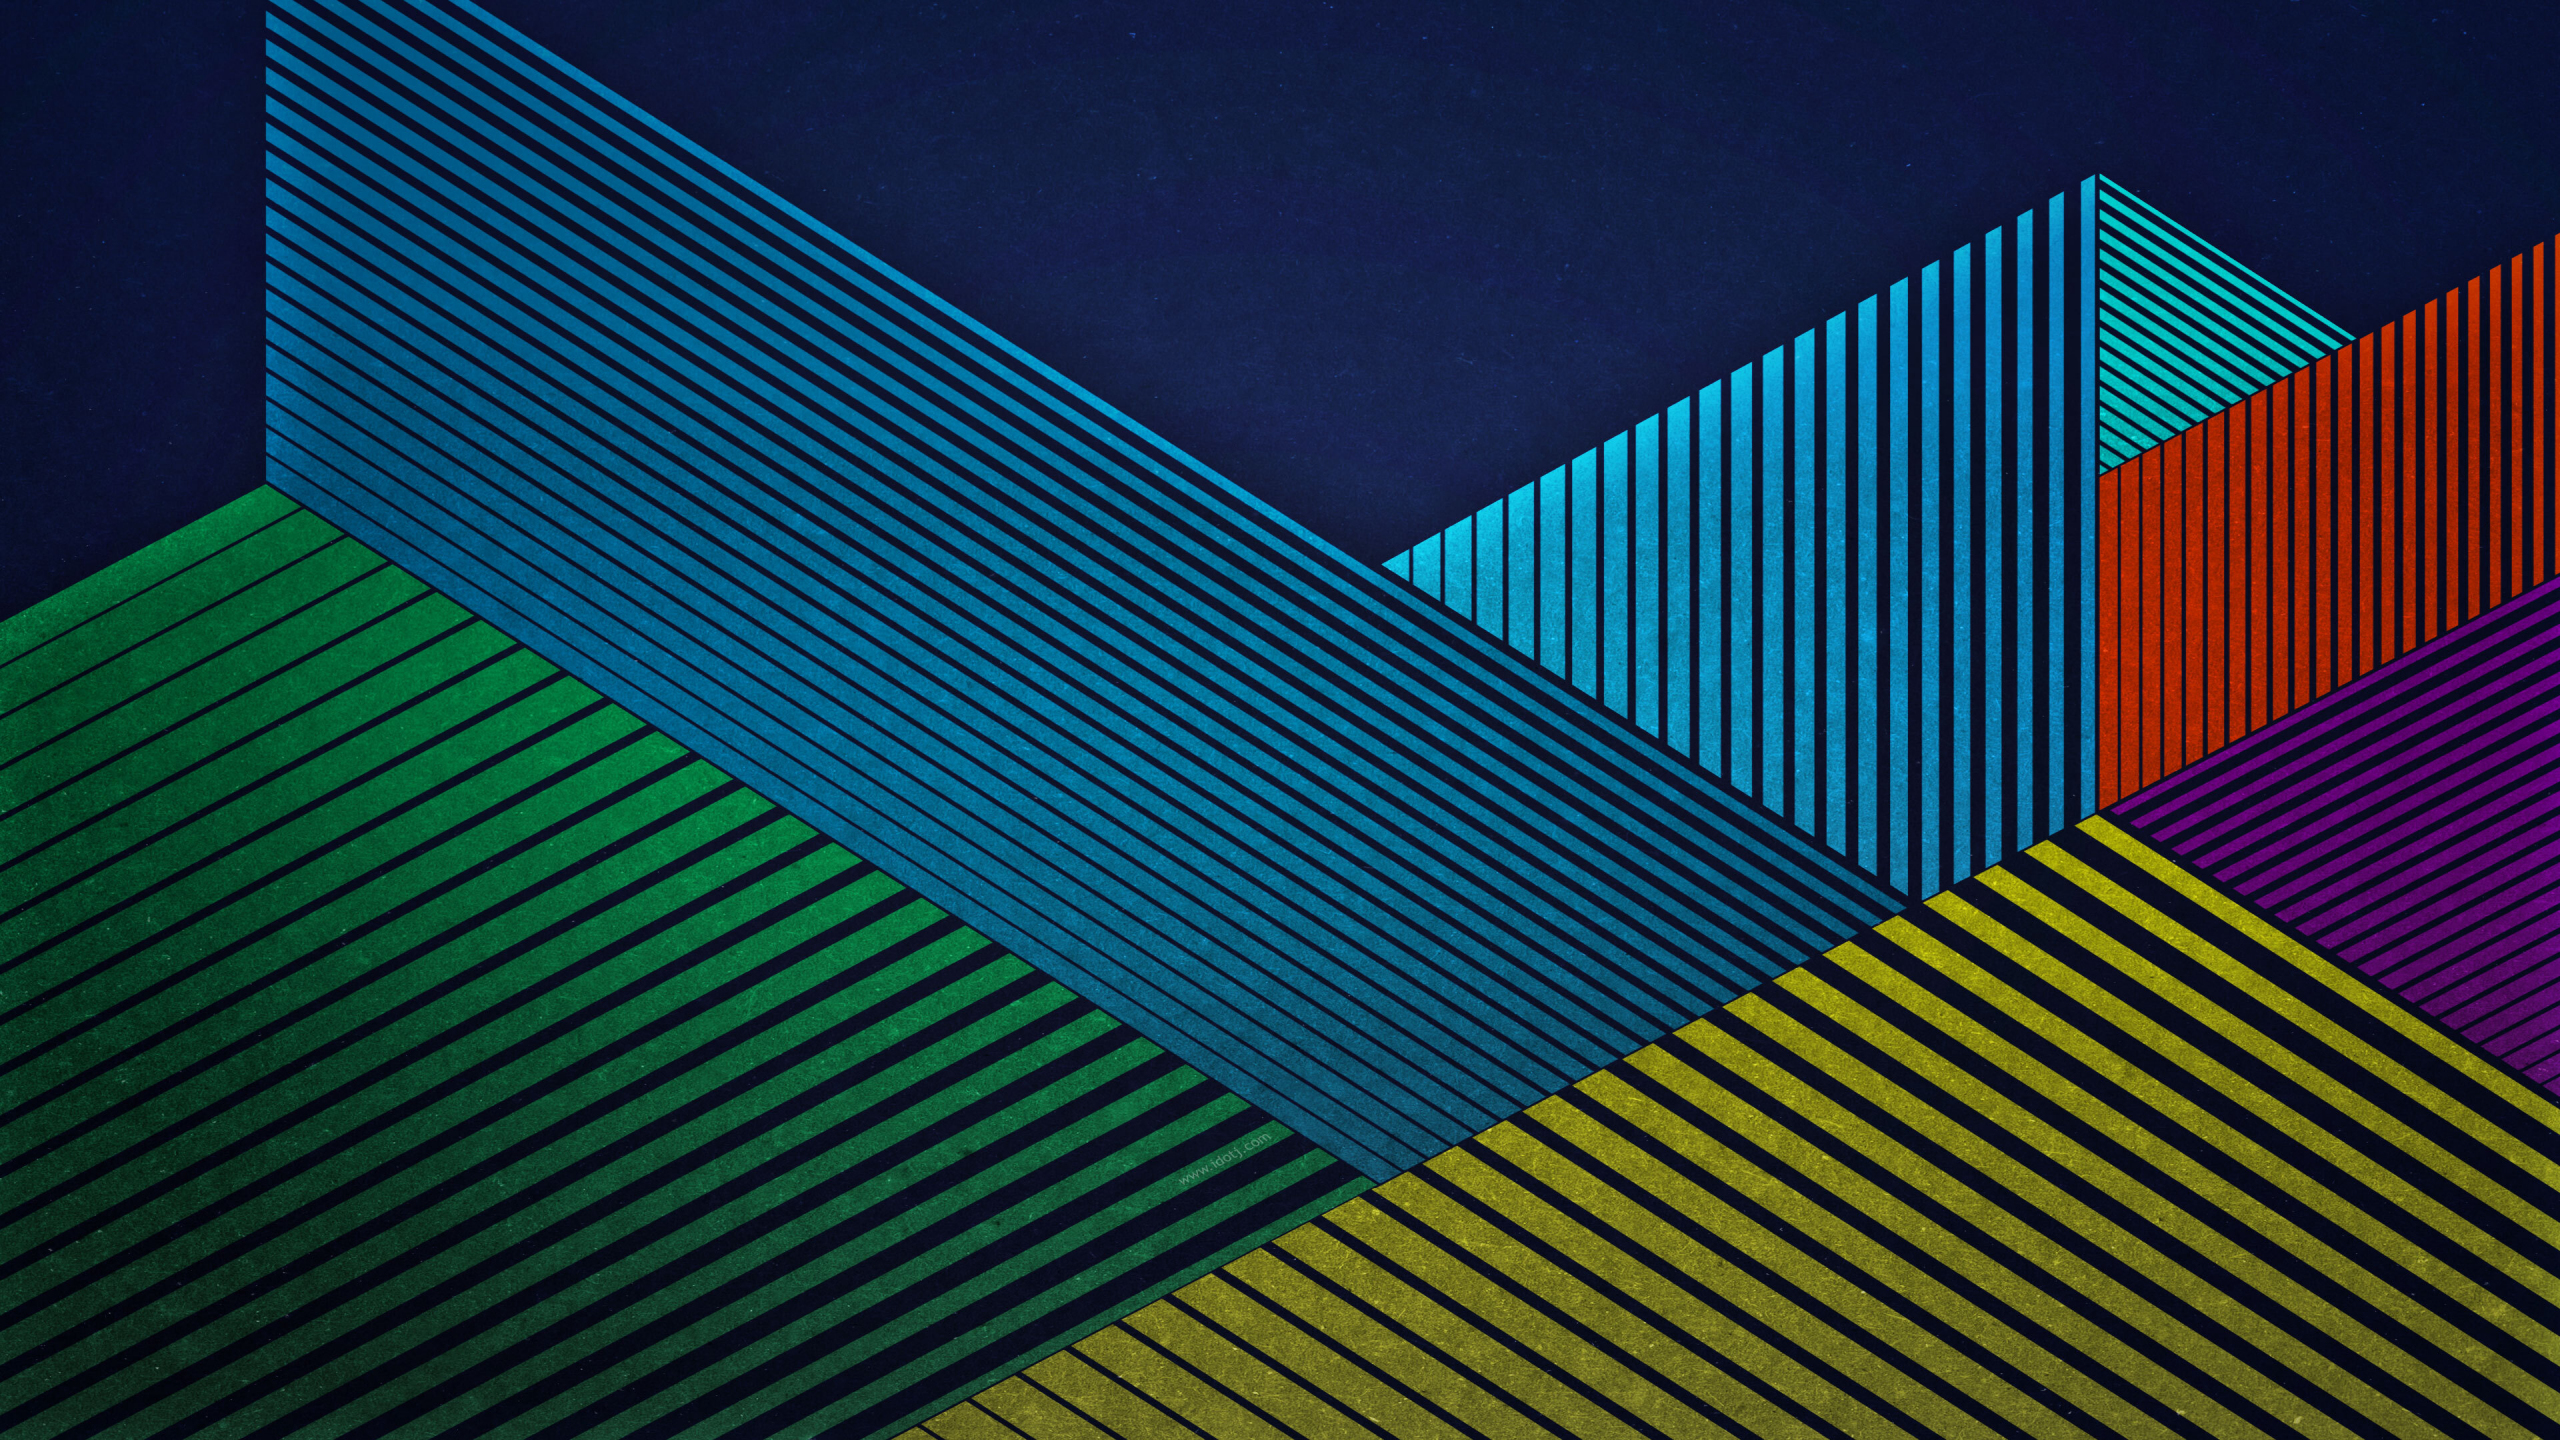 Strips, colorful, abstract art, 2560x1440 wallpaper